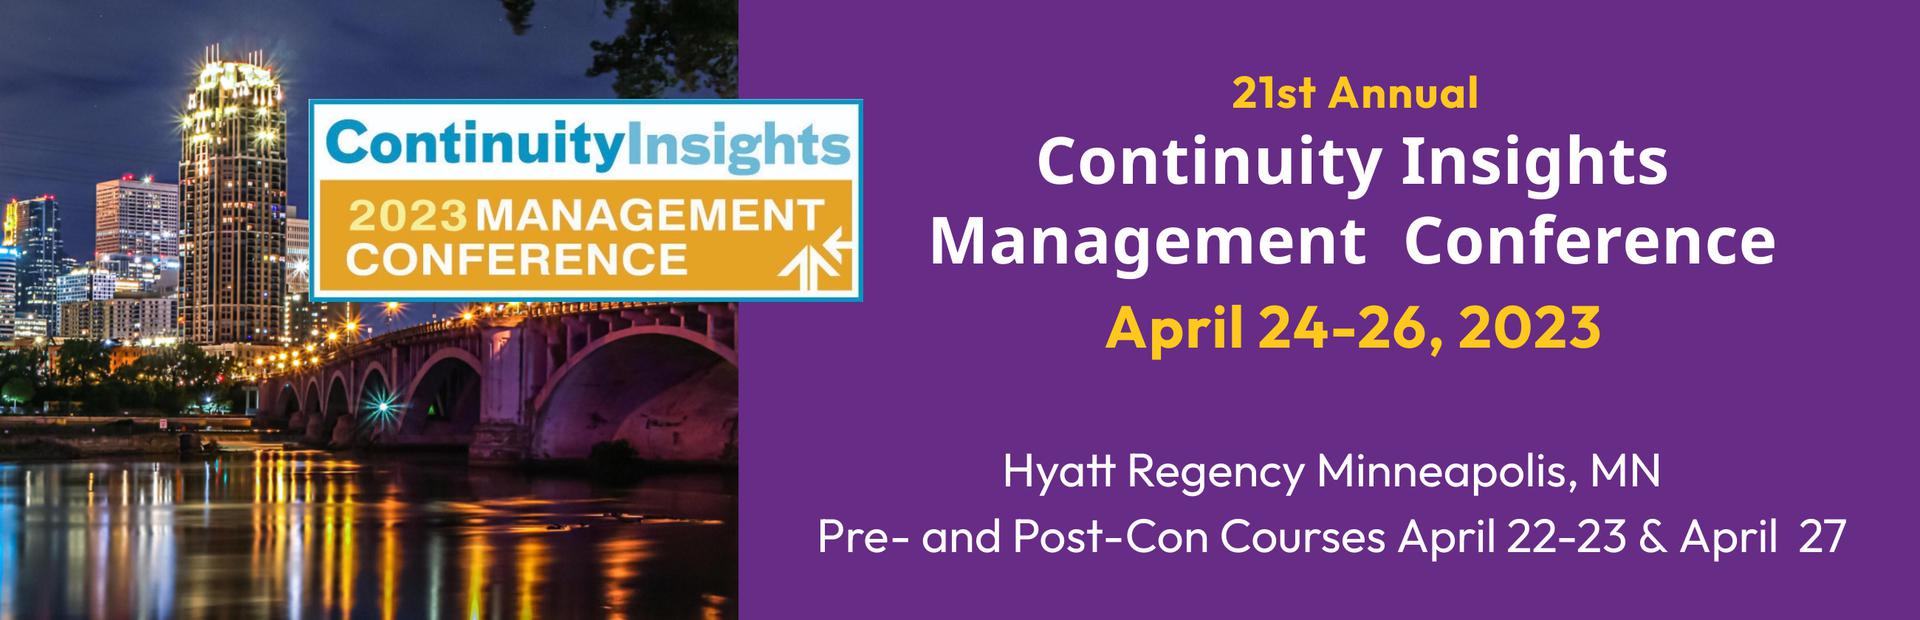 2023 Continuity Insights Management Conference Registration now open